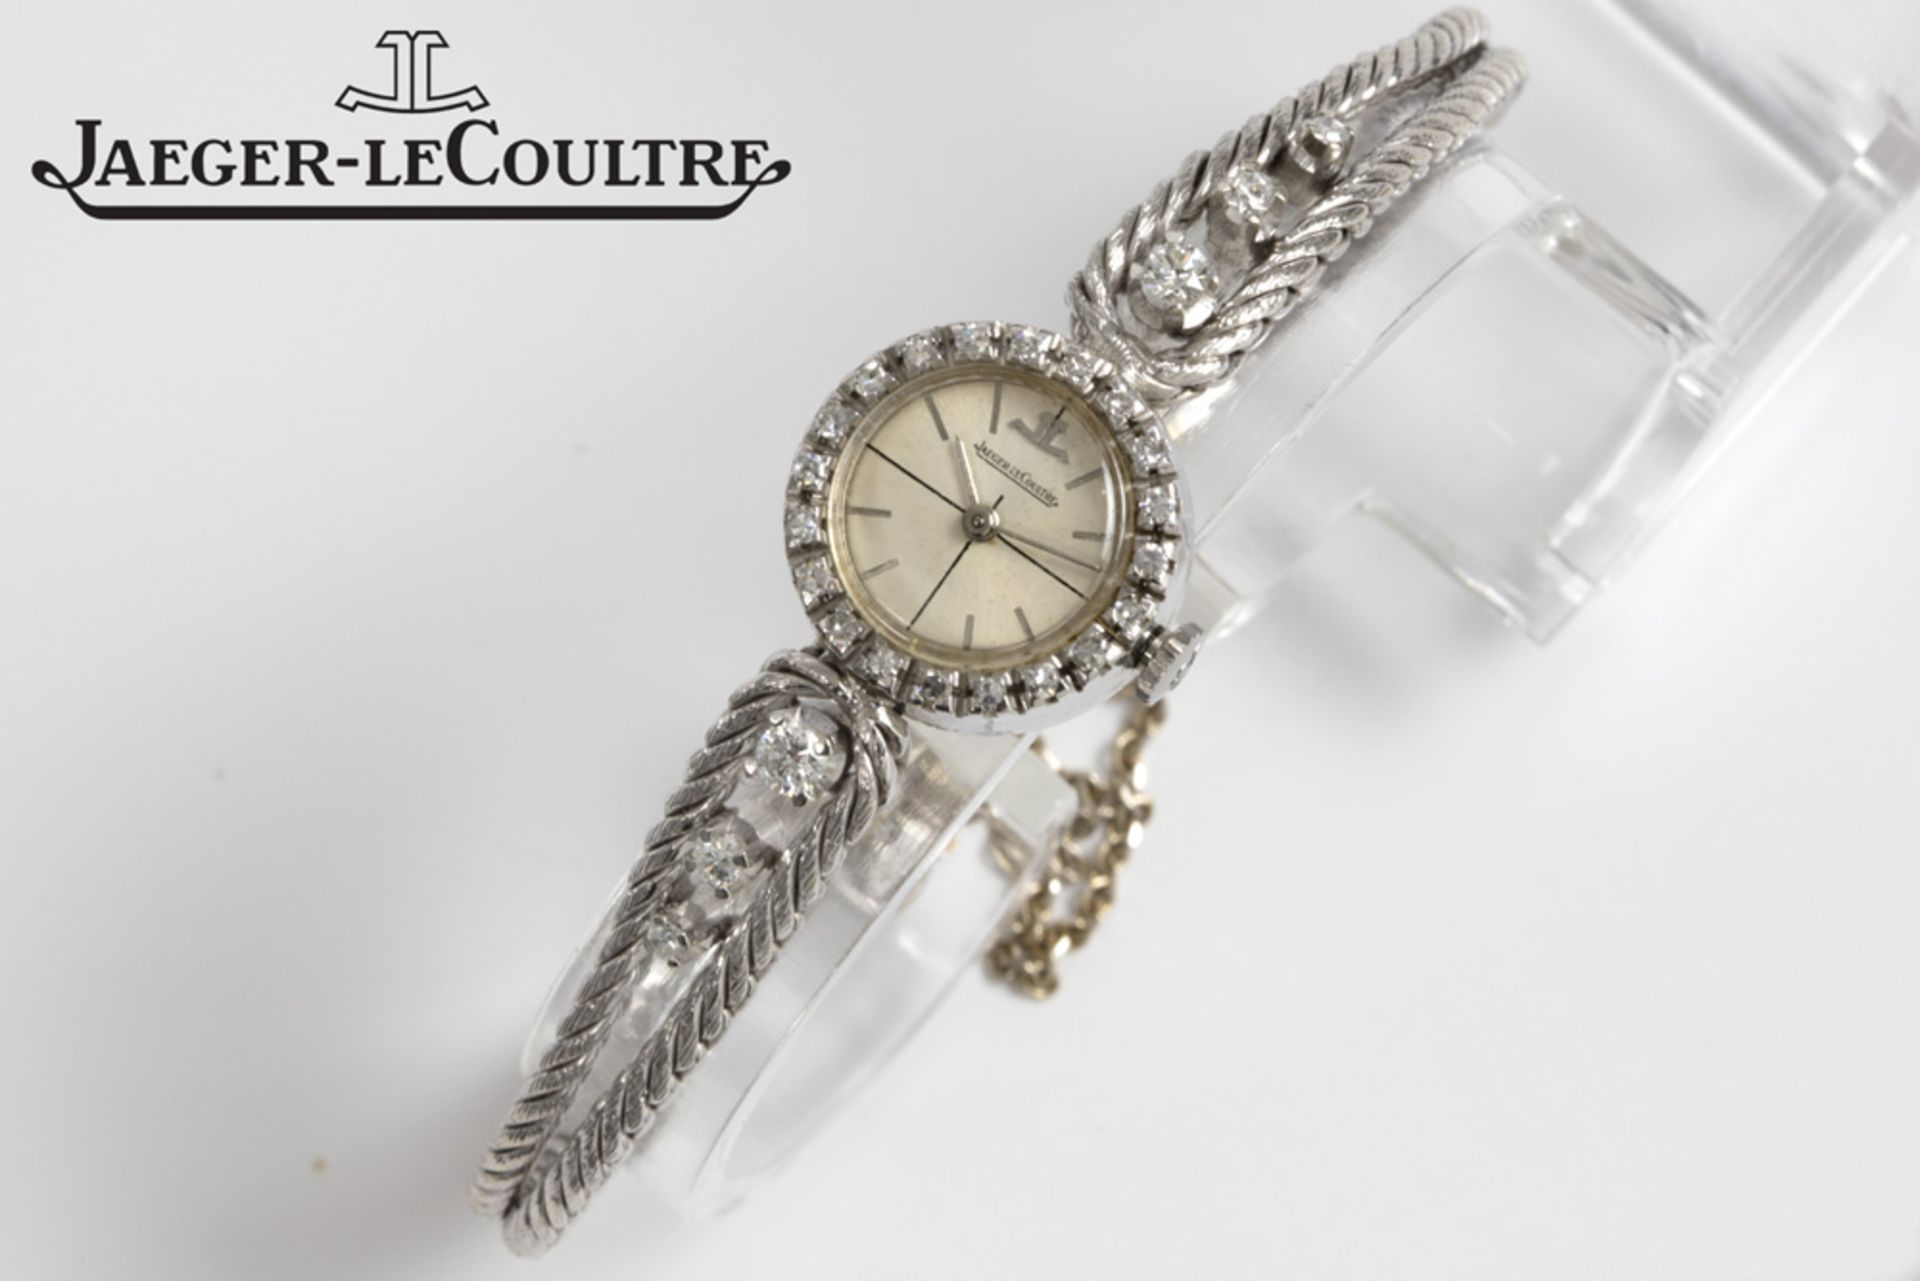 vintage Jaeger-LeCoultre marked mechanical ladies' wristwatch in white gold (18 carat) with diamonds